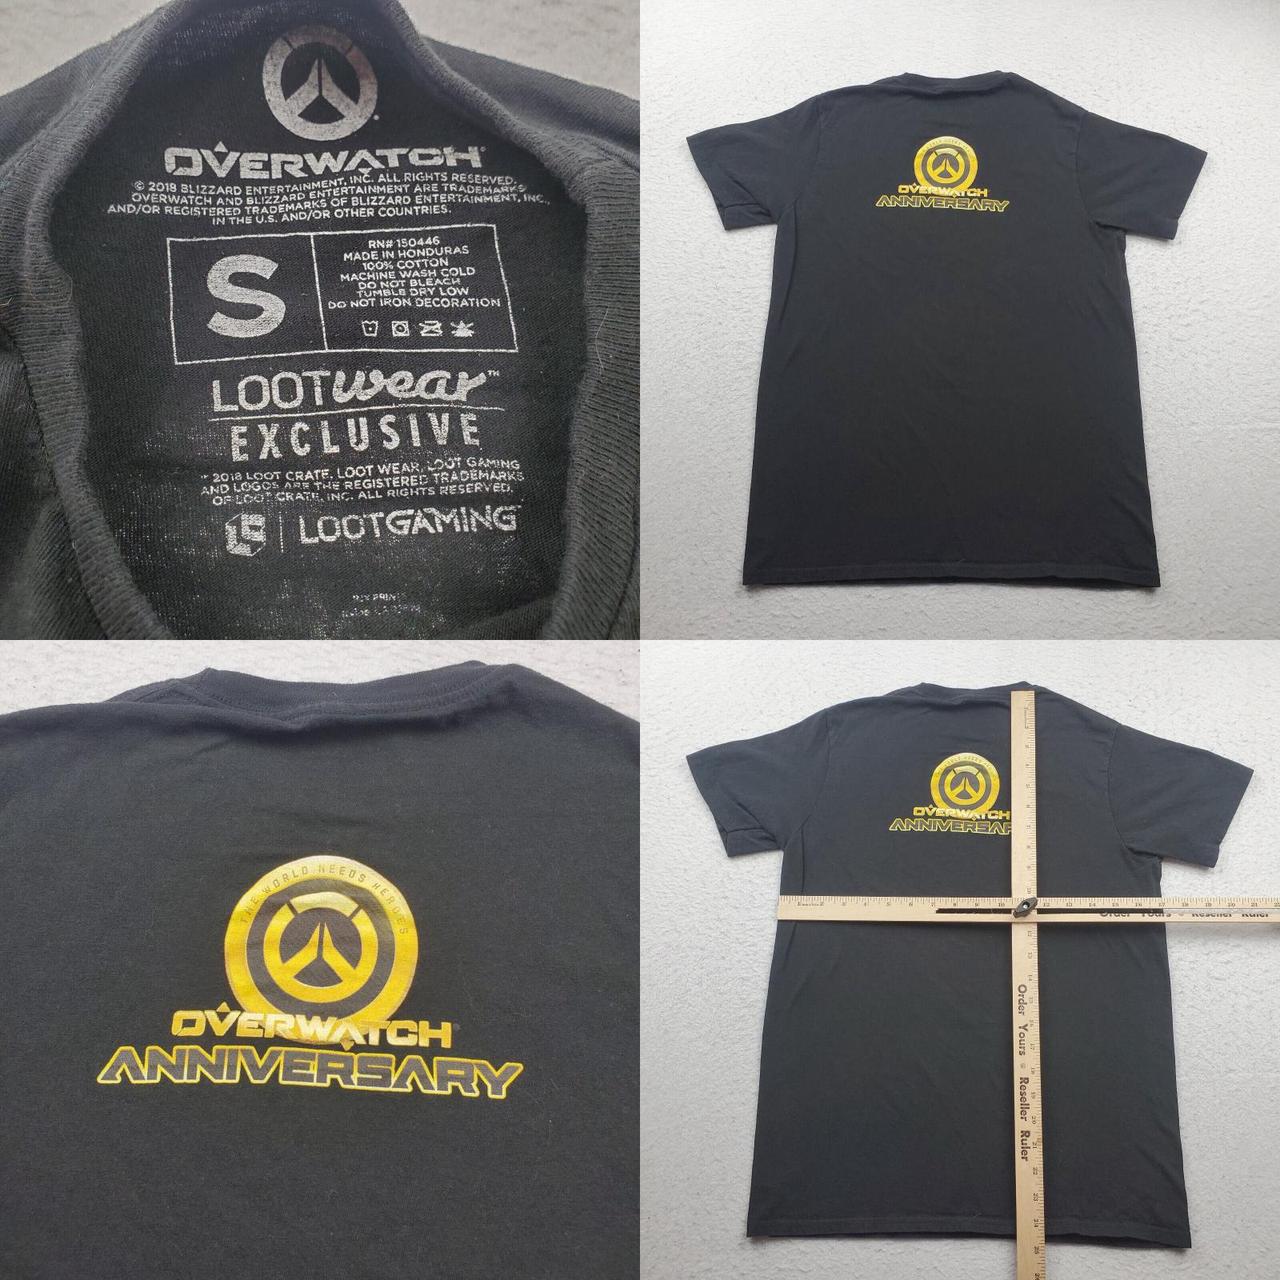 Overwatch Men's Black and Gold T-shirt (4)